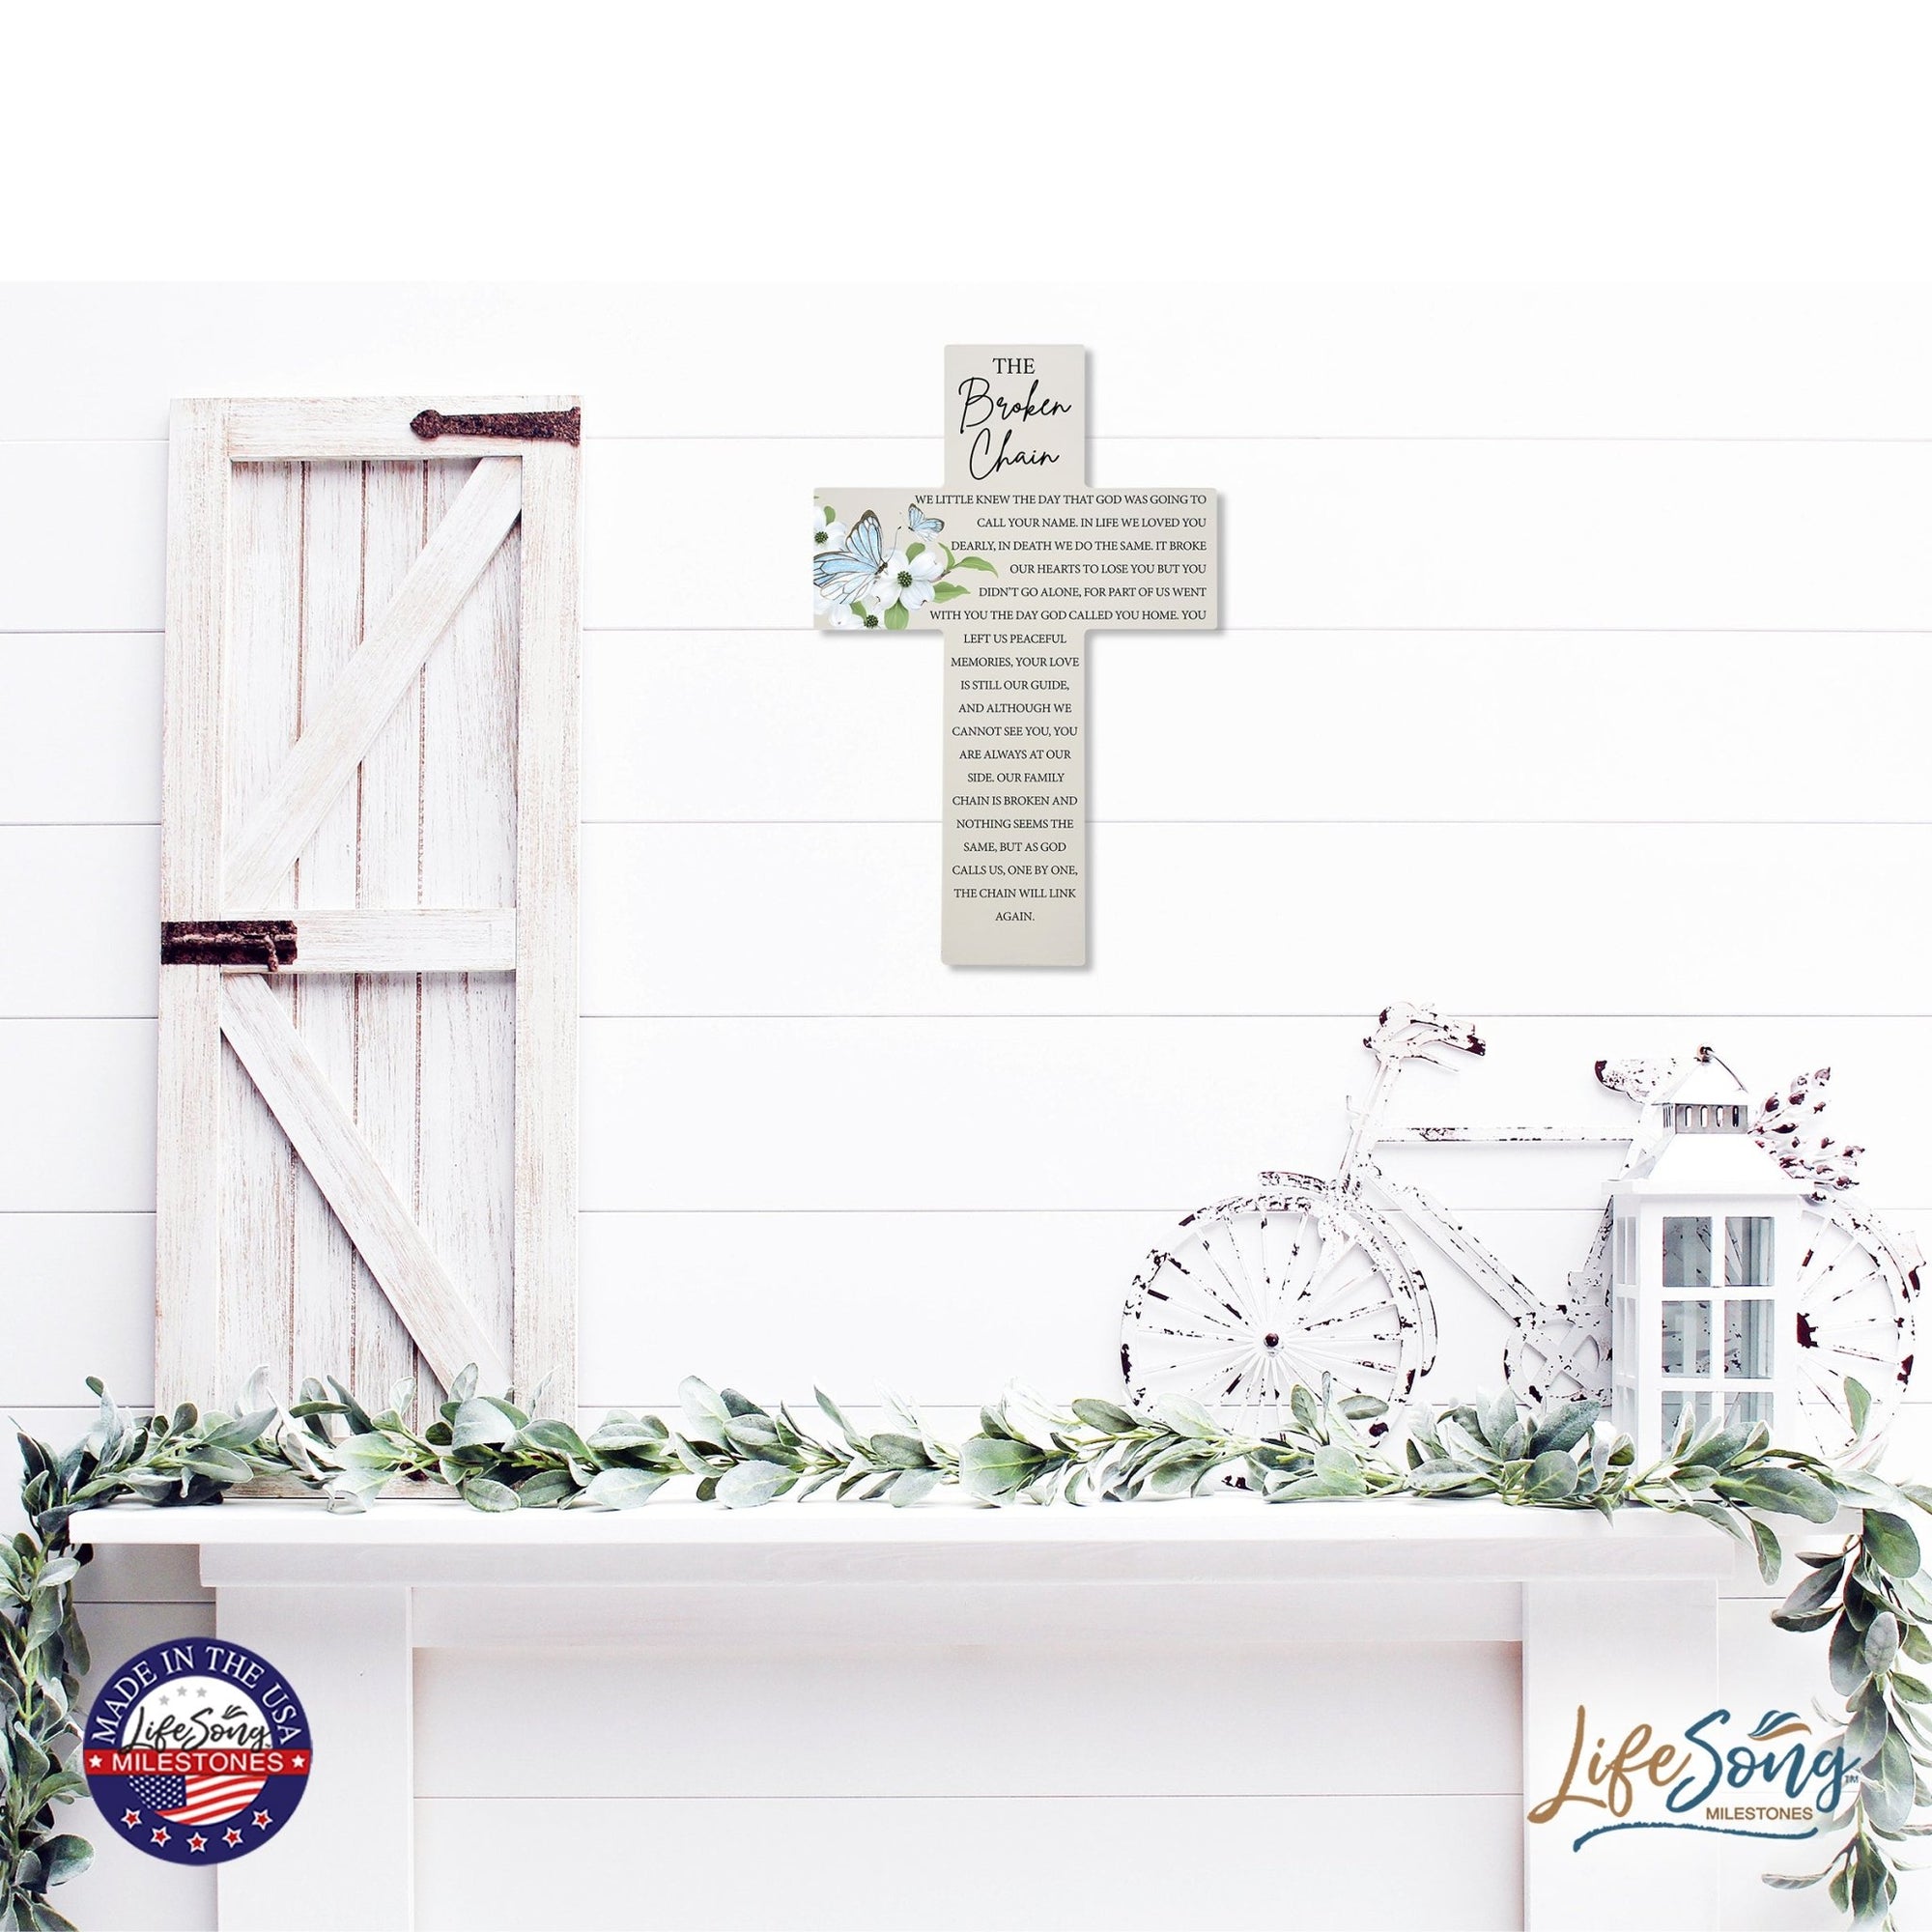 Butterfly Memorial Wall Cross For Loss of Loved One The Broken Chain (Butterfly) Quote Bereavement Keepsake 14 x 9.25 The Broken Chain We Little Knew The Day That God Was Going To Call Your Name - LifeSong Milestones